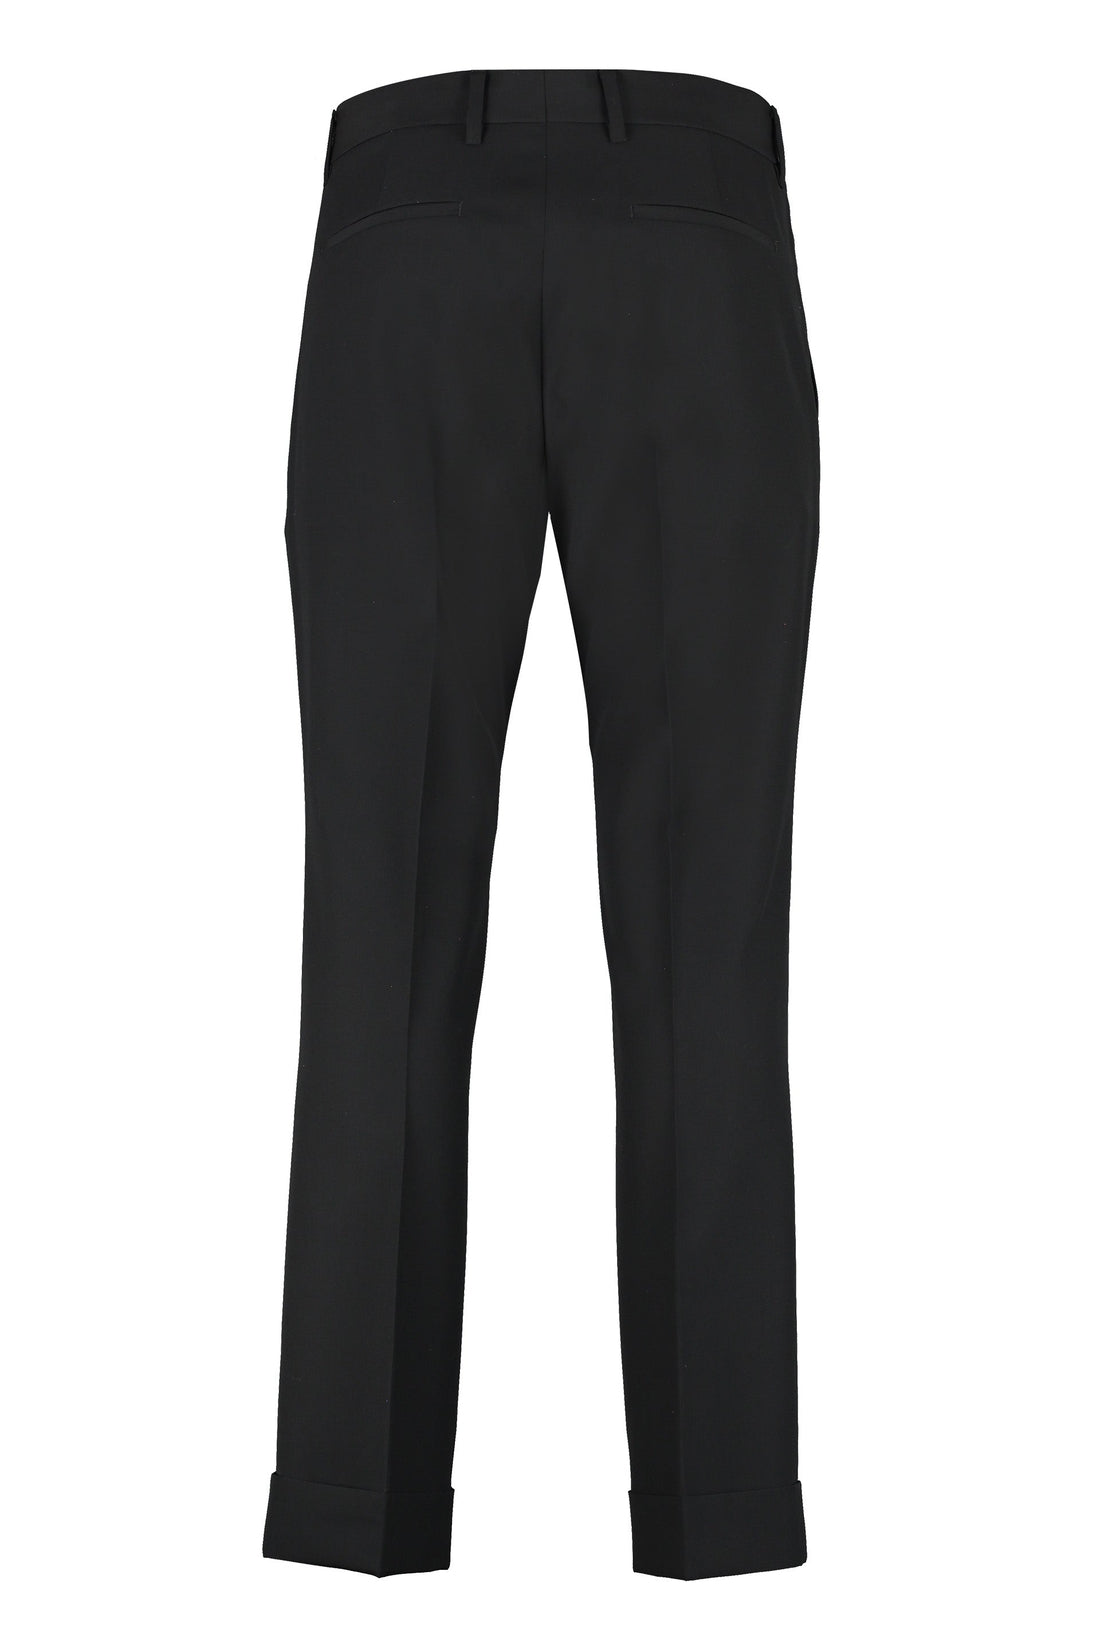 Givenchy-OUTLET-SALE-Slim wool trousers-ARCHIVIST